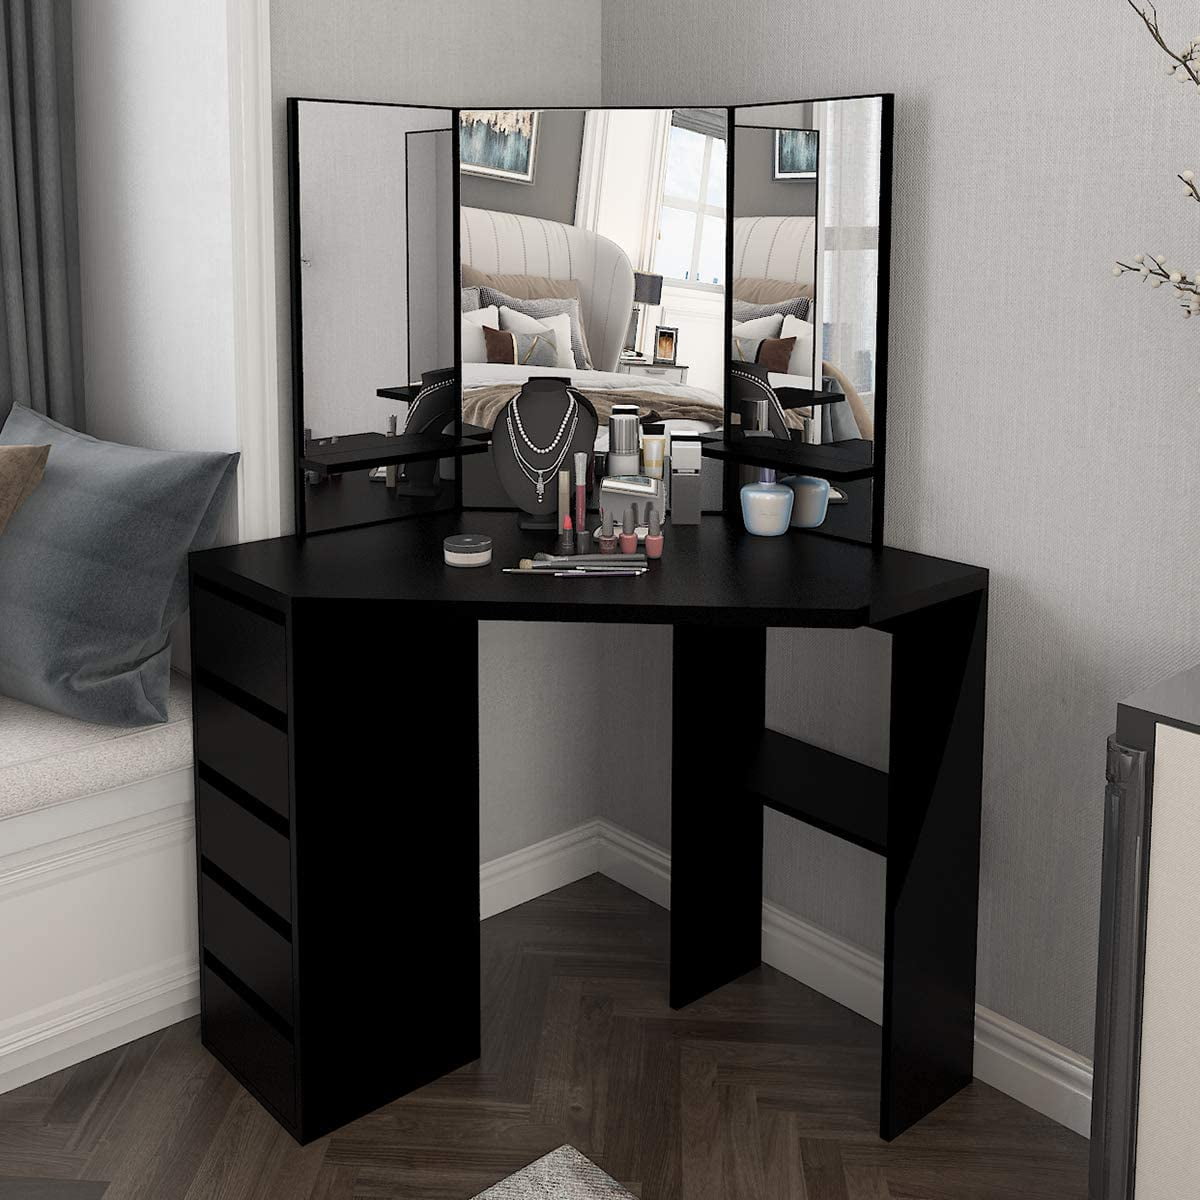 Details about   Corner Makeup Vanity Table 3 Mirrors And 5 Drawers Dressing Table Jewelry Desk 